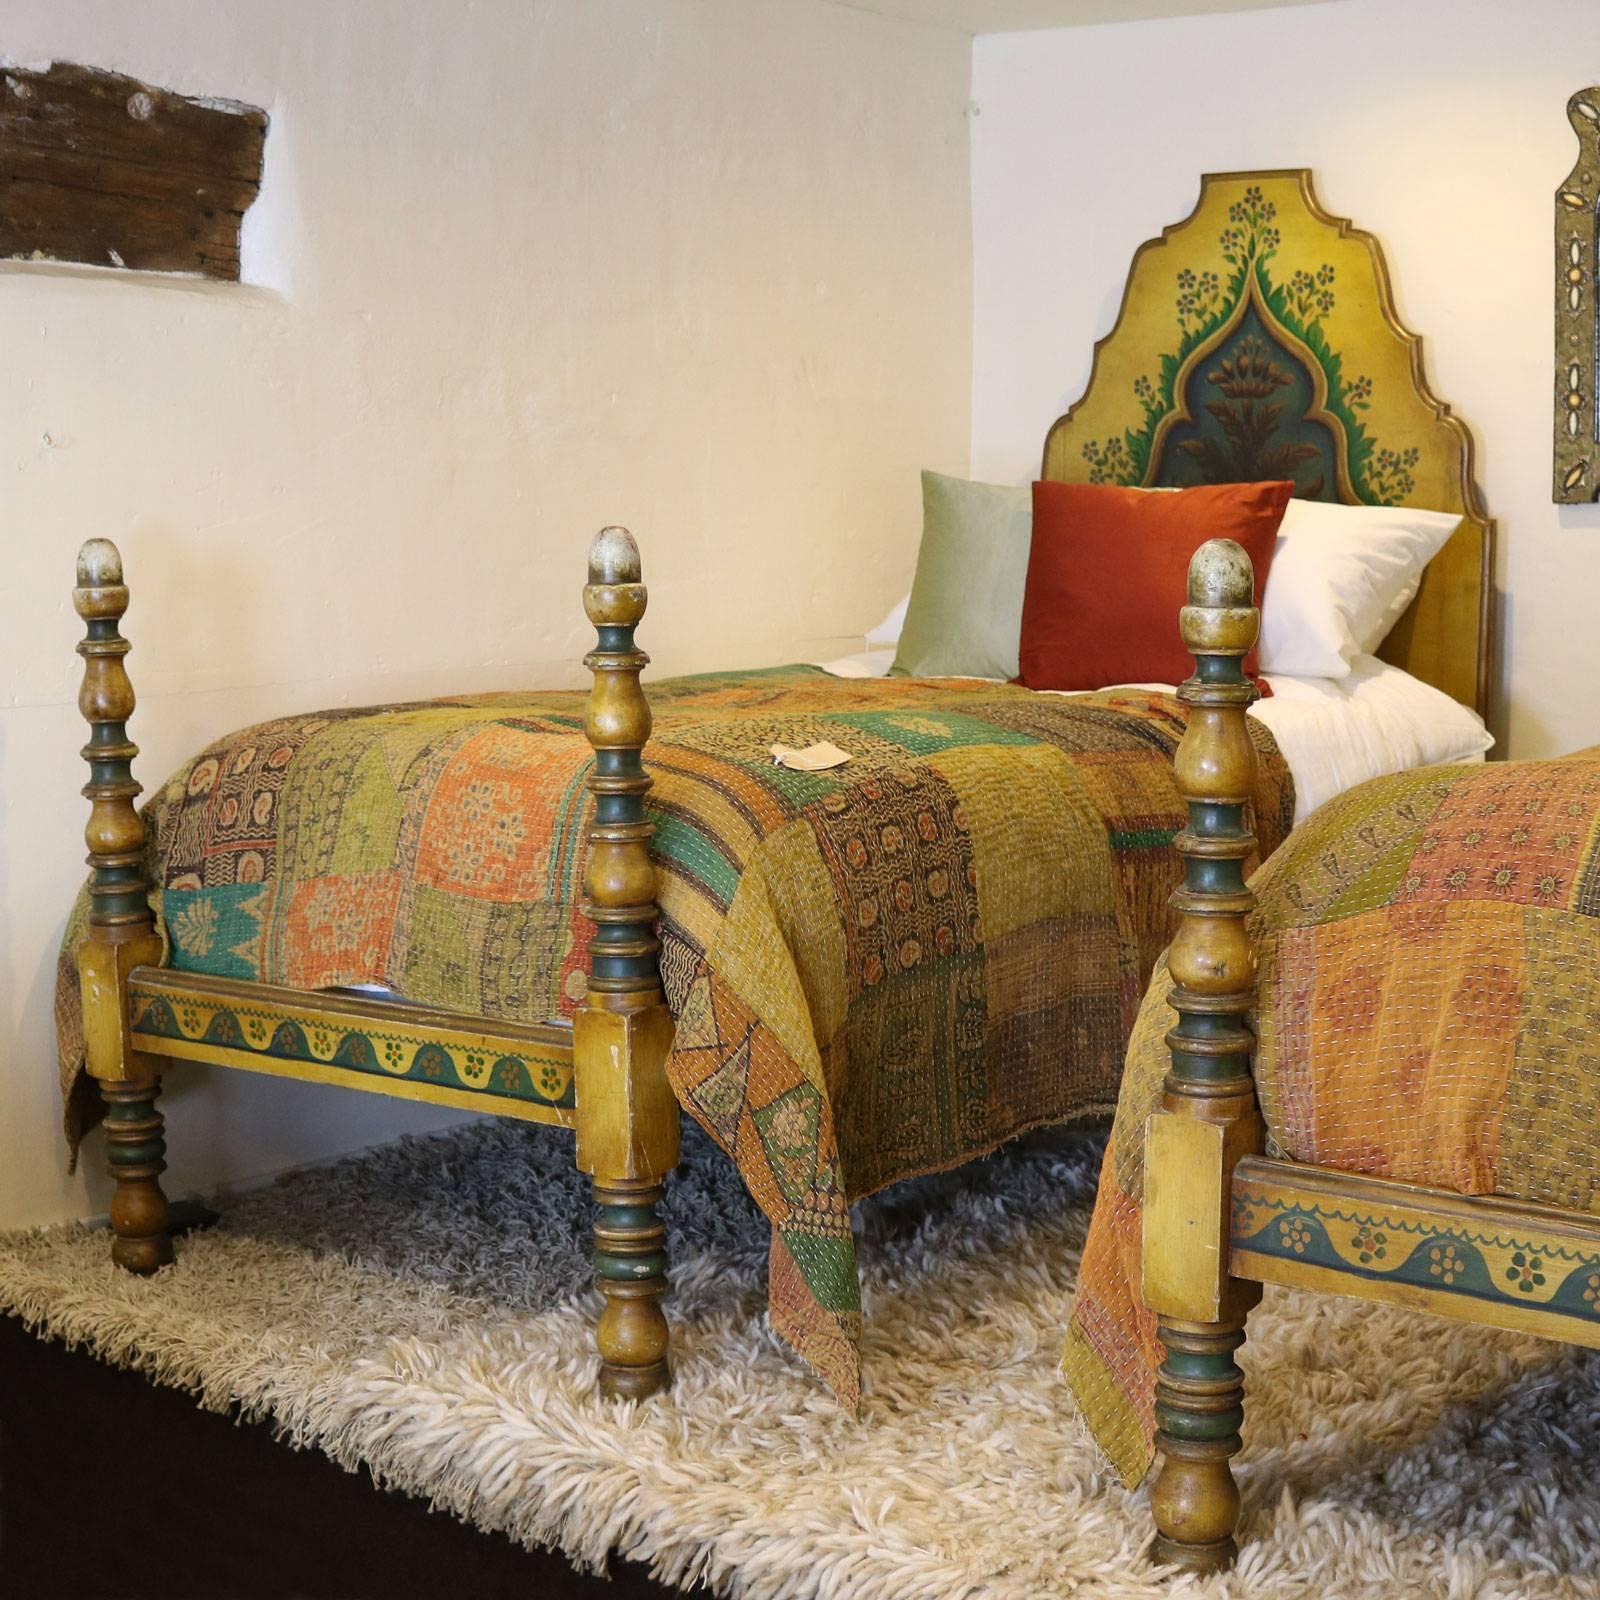 Most unusual pair of Bavarian painted folk art single beds in the Bauernmalerei style. Circa 1910.

The price is for the beds alone, the bases, mattresses and bedding are extra and can be provided by Seventh Heaven.

The dimensions of the beds